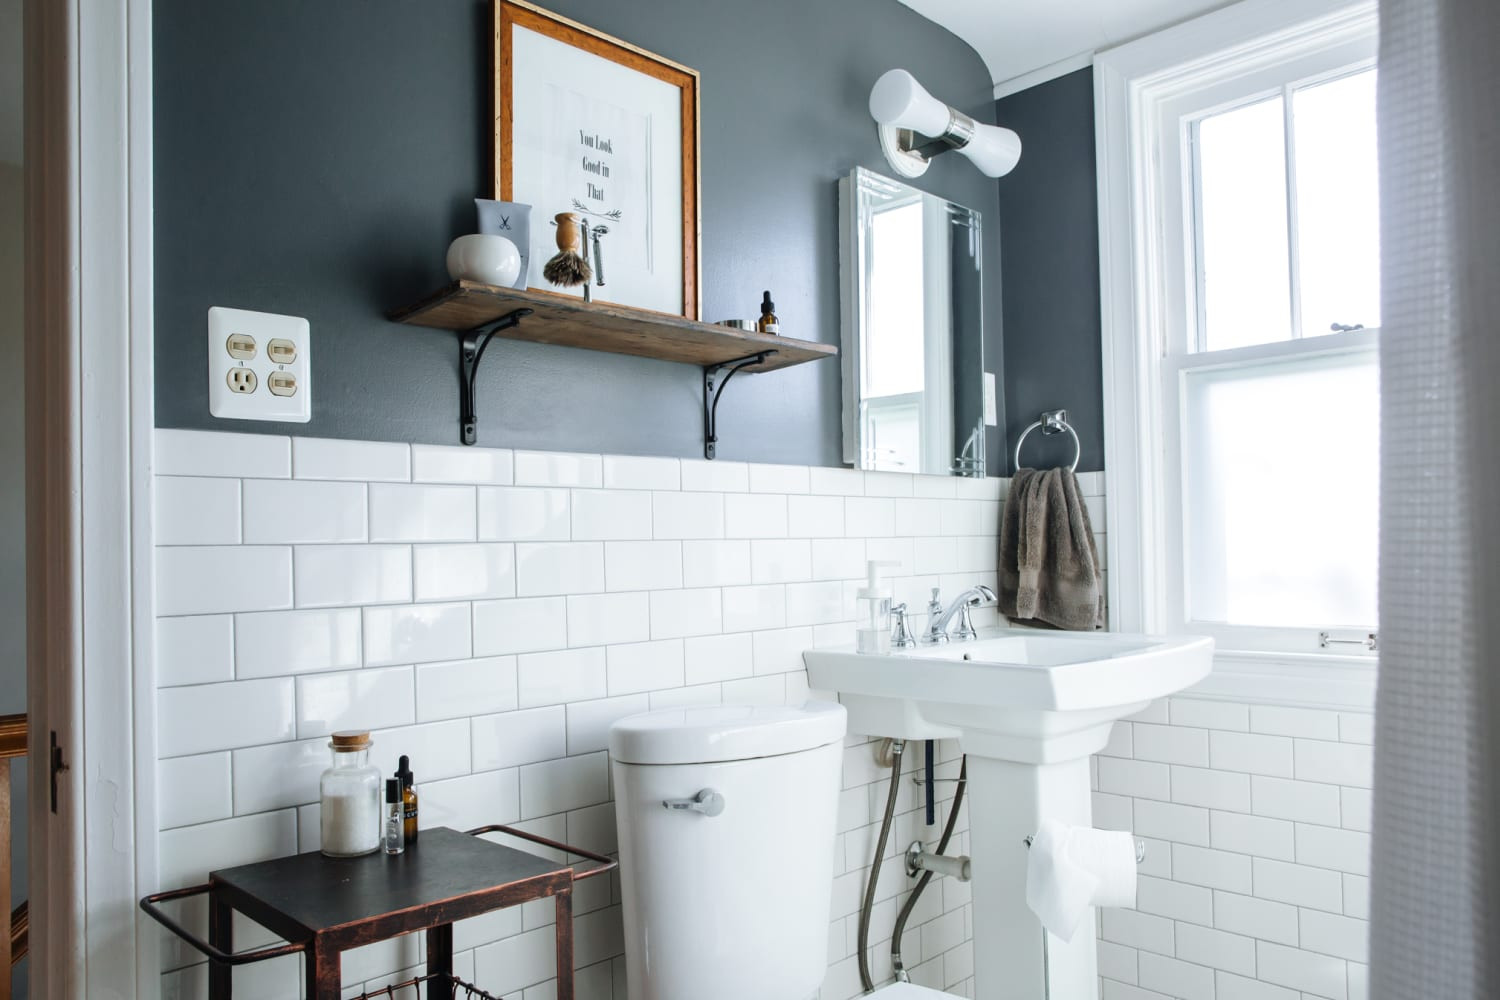 Bathroom Wall Paint
 Best Paint Colors for Small Bathrooms